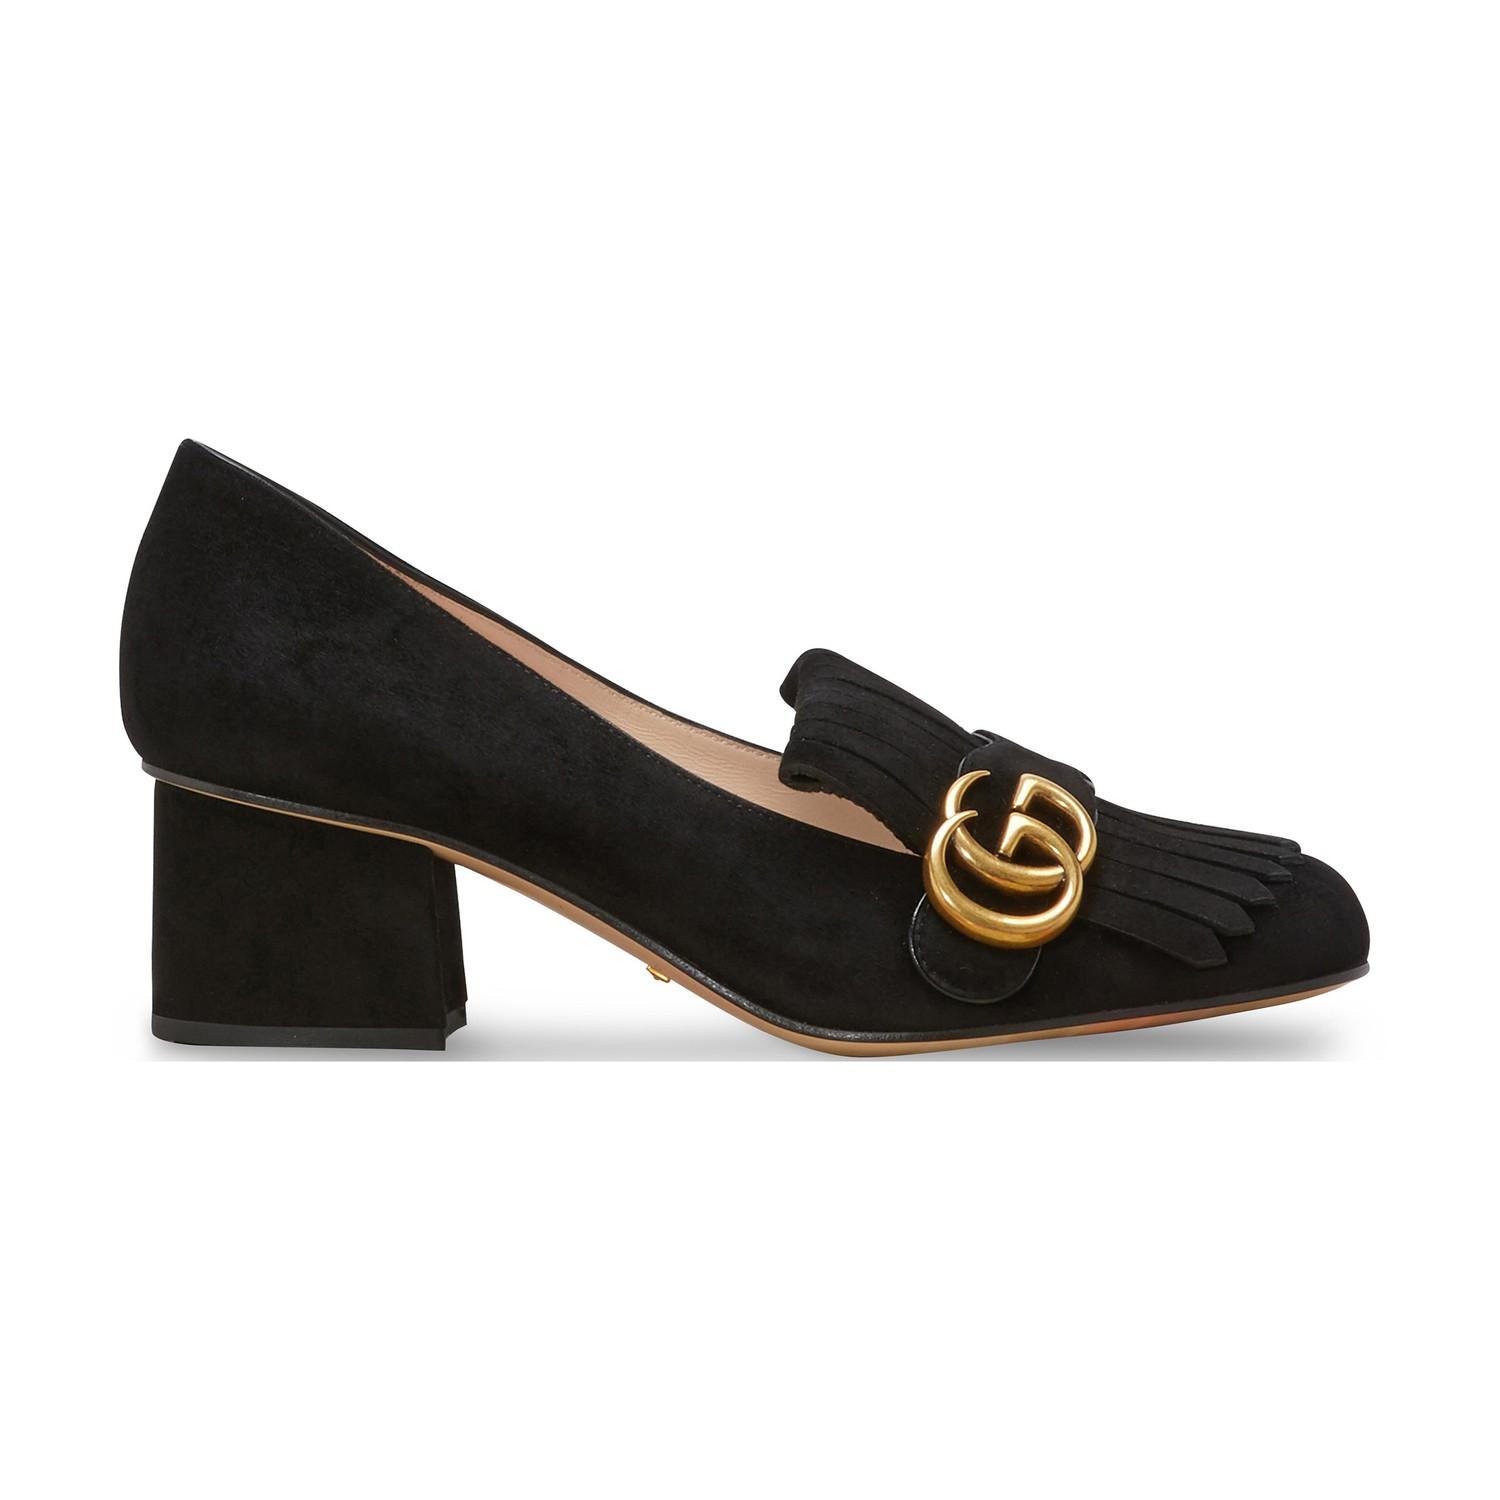 Gucci Leather Mid-Heel Pump in Black - Save 39% -